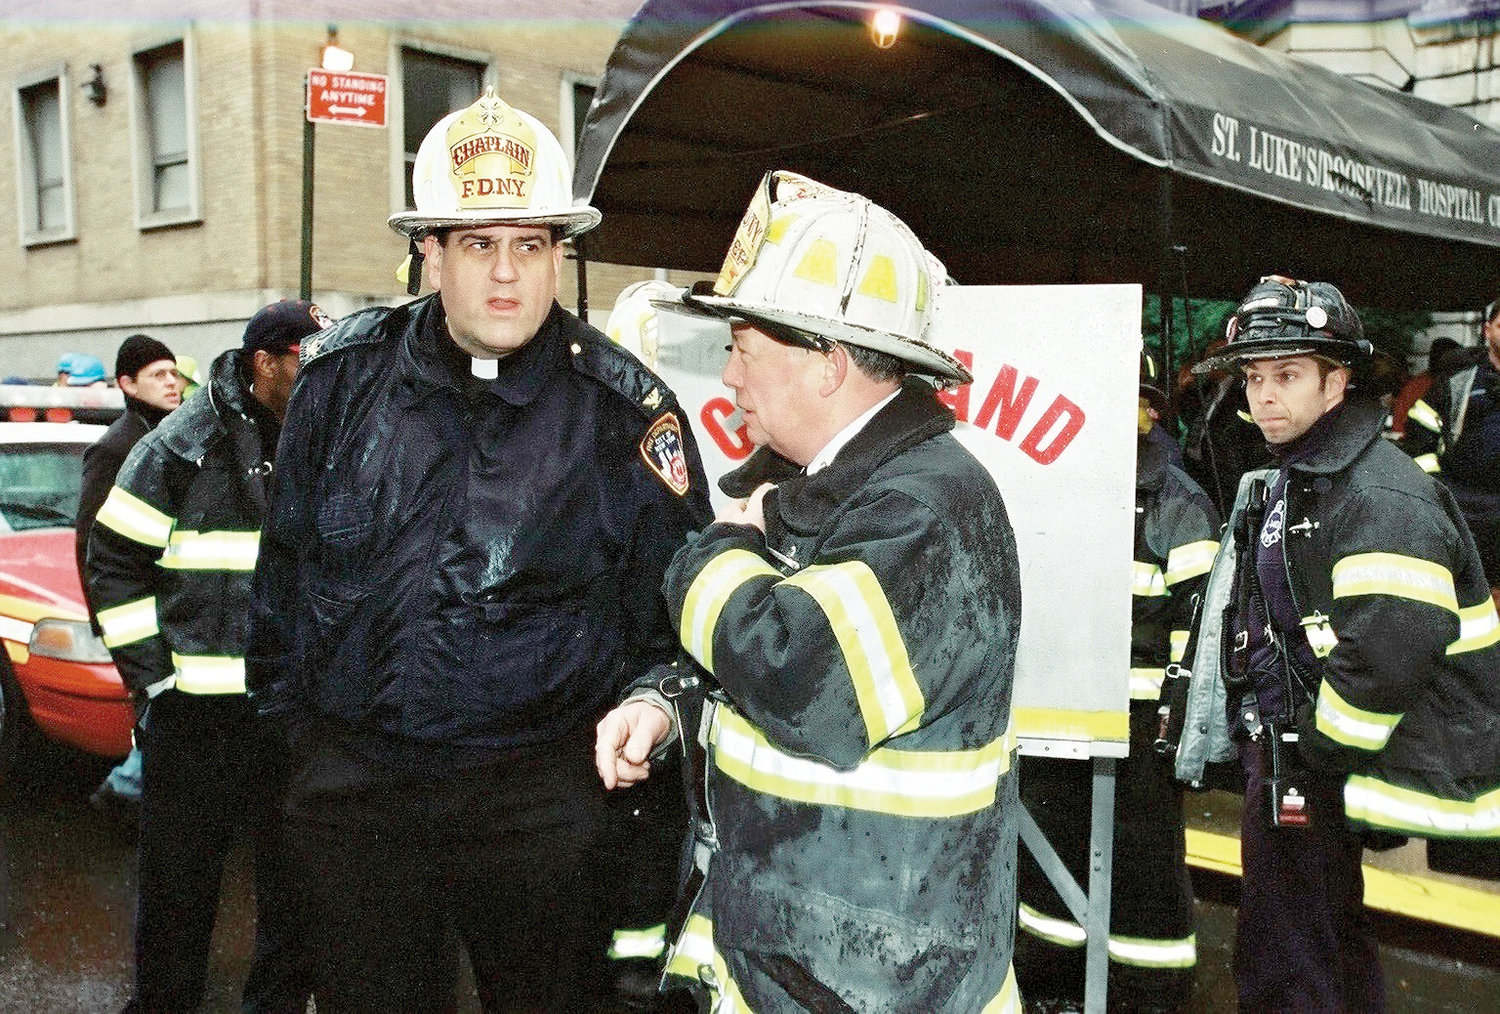 Msgr. Marc Filacchione, an archdiocesan priest who has served as an FDNY chaplain since 1995, confers with Deputy Chief Edward Dennehy outside St. Luke’s-Roosevelt Hospital in Manhattan in response to a fire at the Cathedral of St. John the Divine in December 2001. Msgr. Filacchione also responded on 9/11 and for months afterward at Ground Zero.